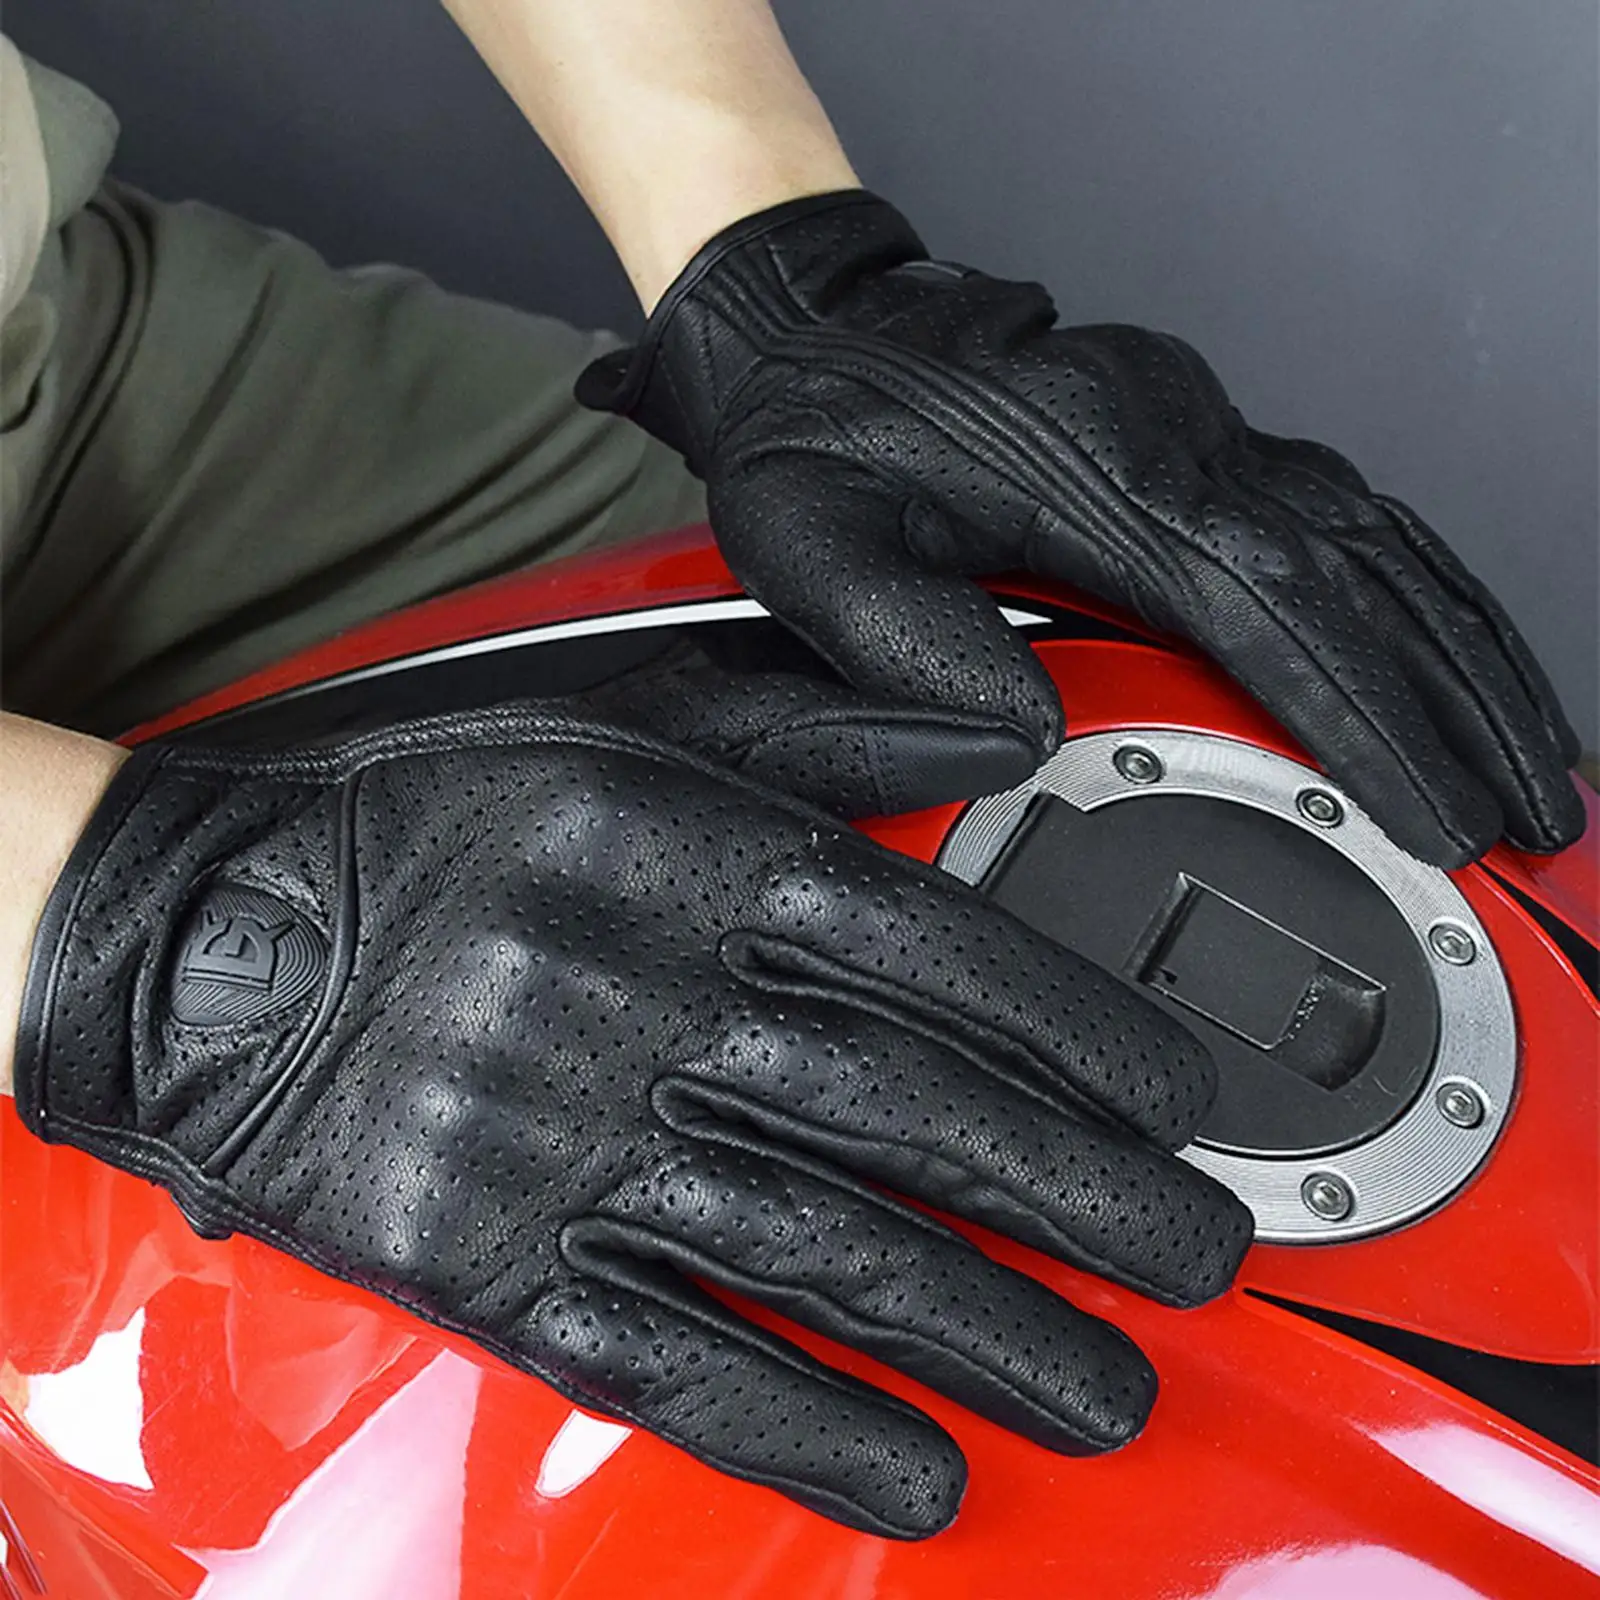 Goatskin Leather Touchscreen Motorcycle Riding Perforated Gloves Men Women